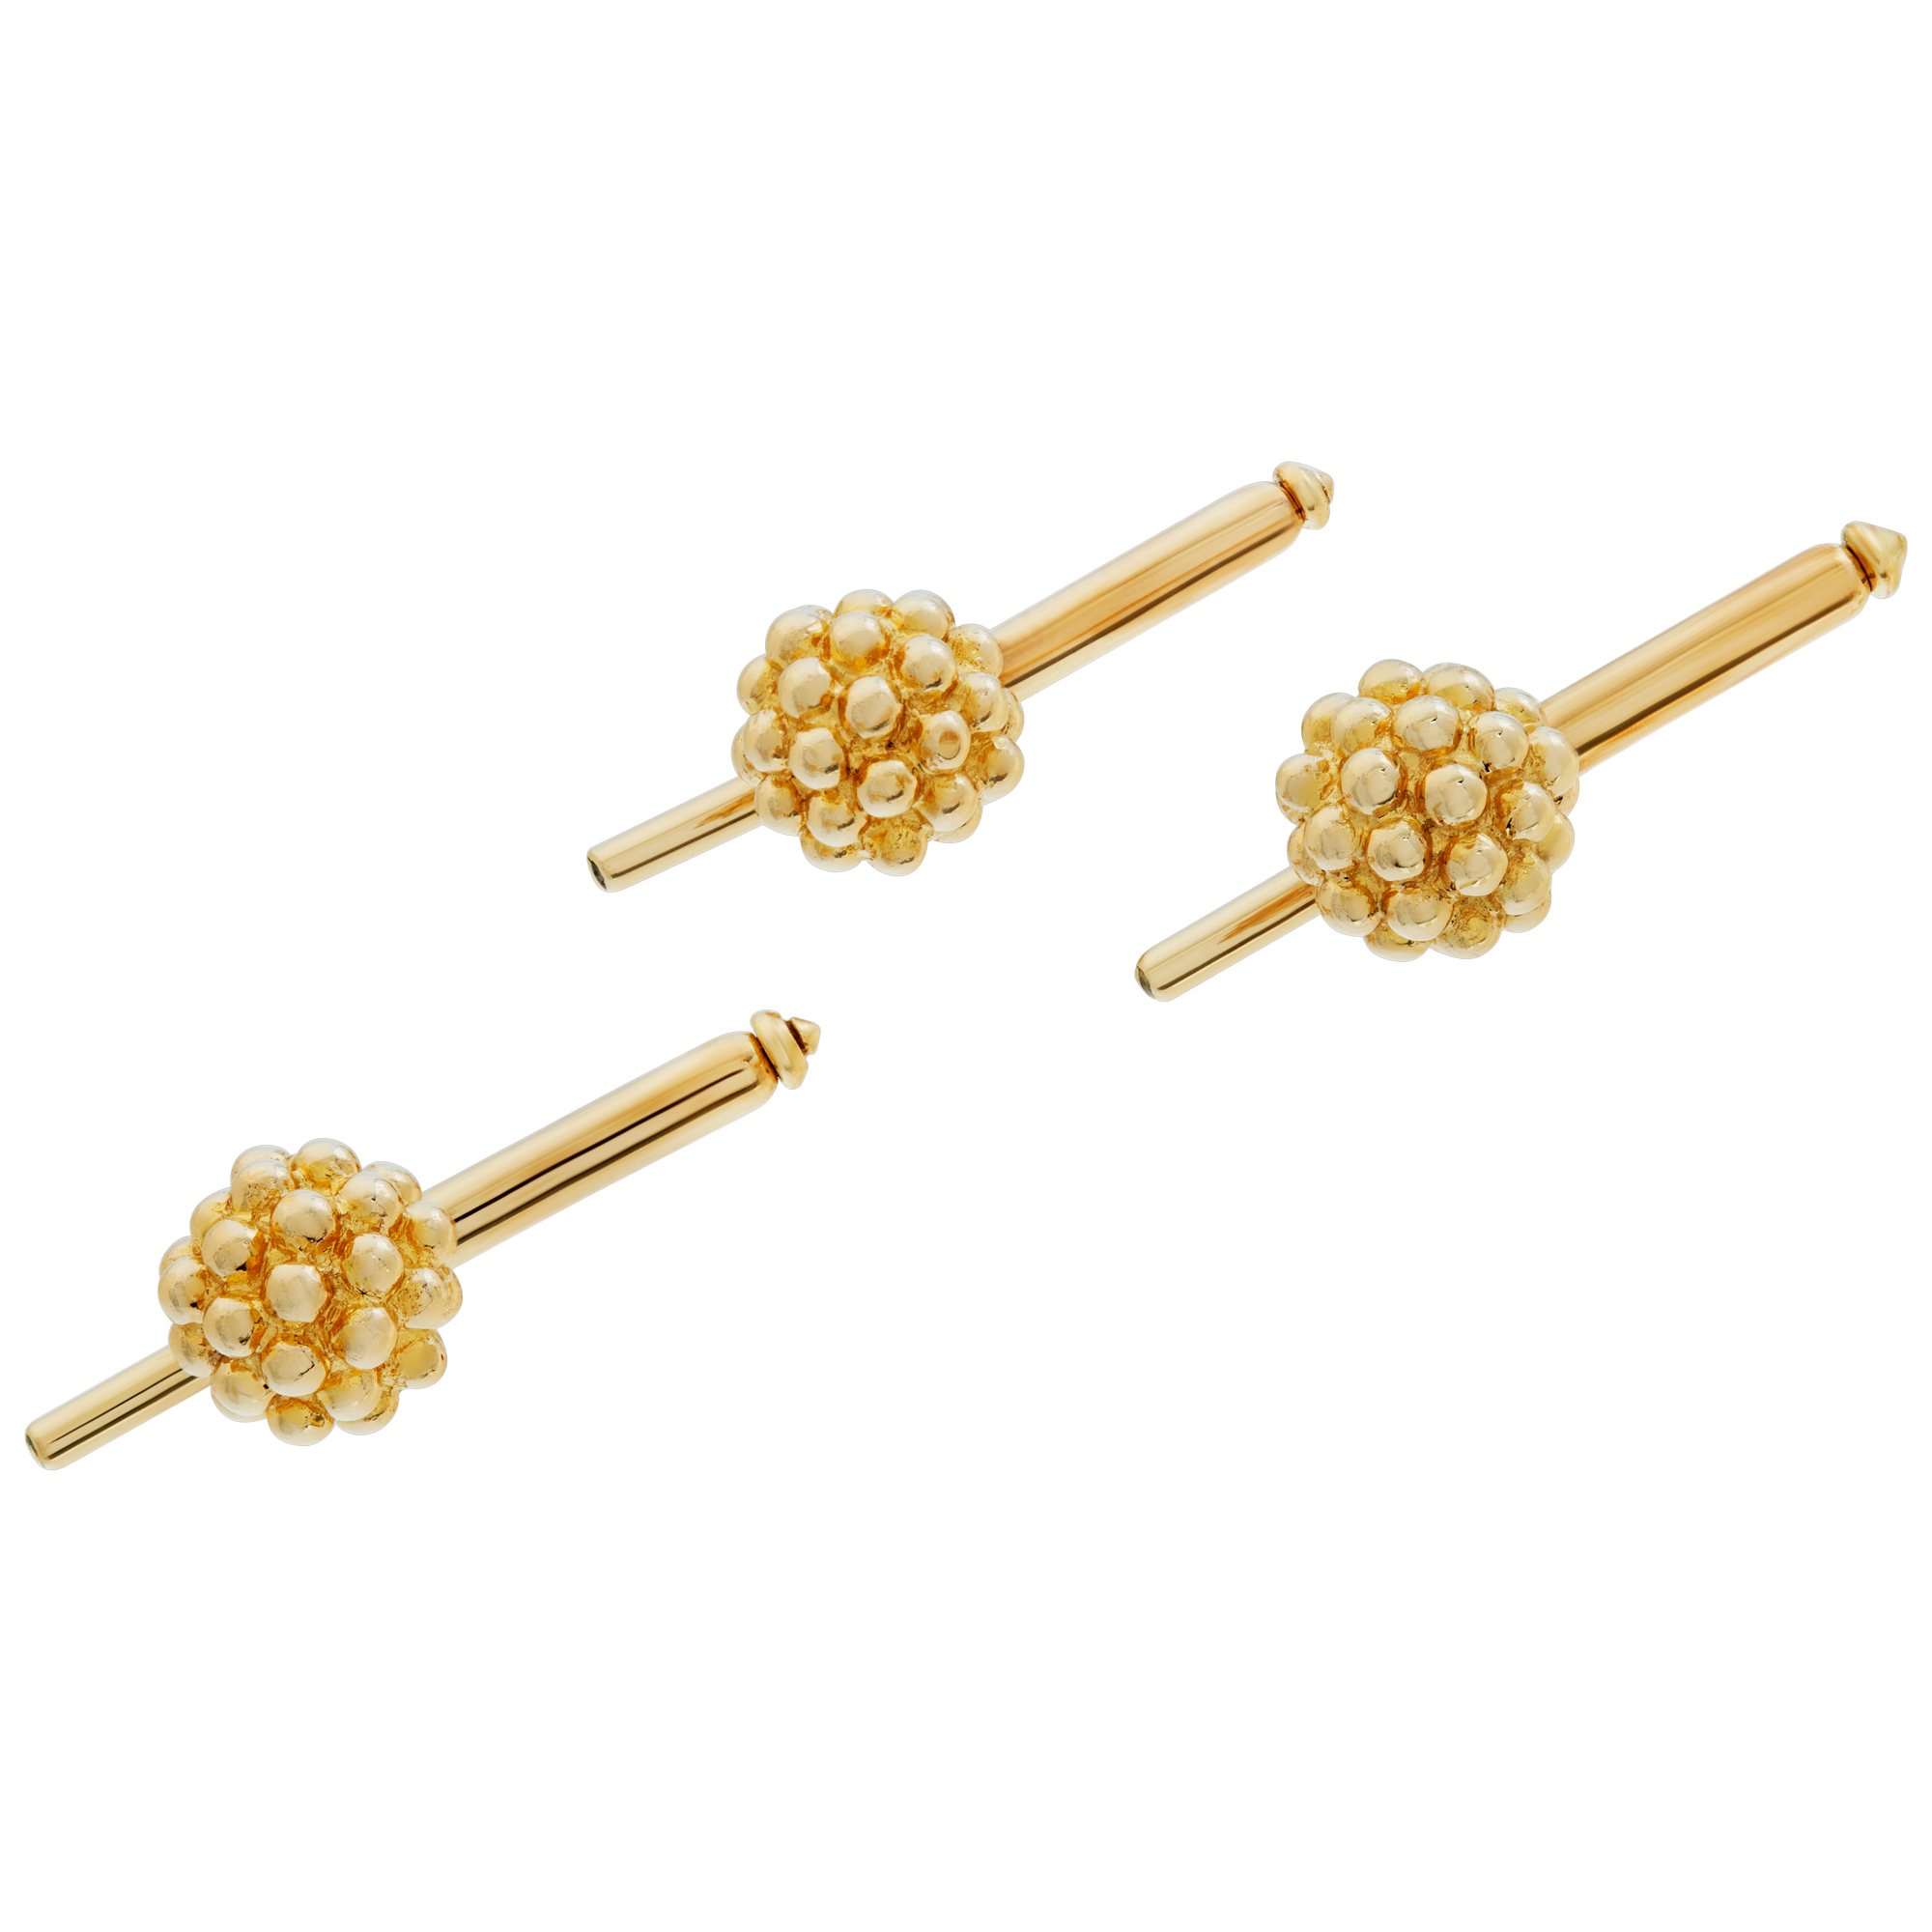 Berry stud setting of 3 pieces in 14K yellow gold image 1